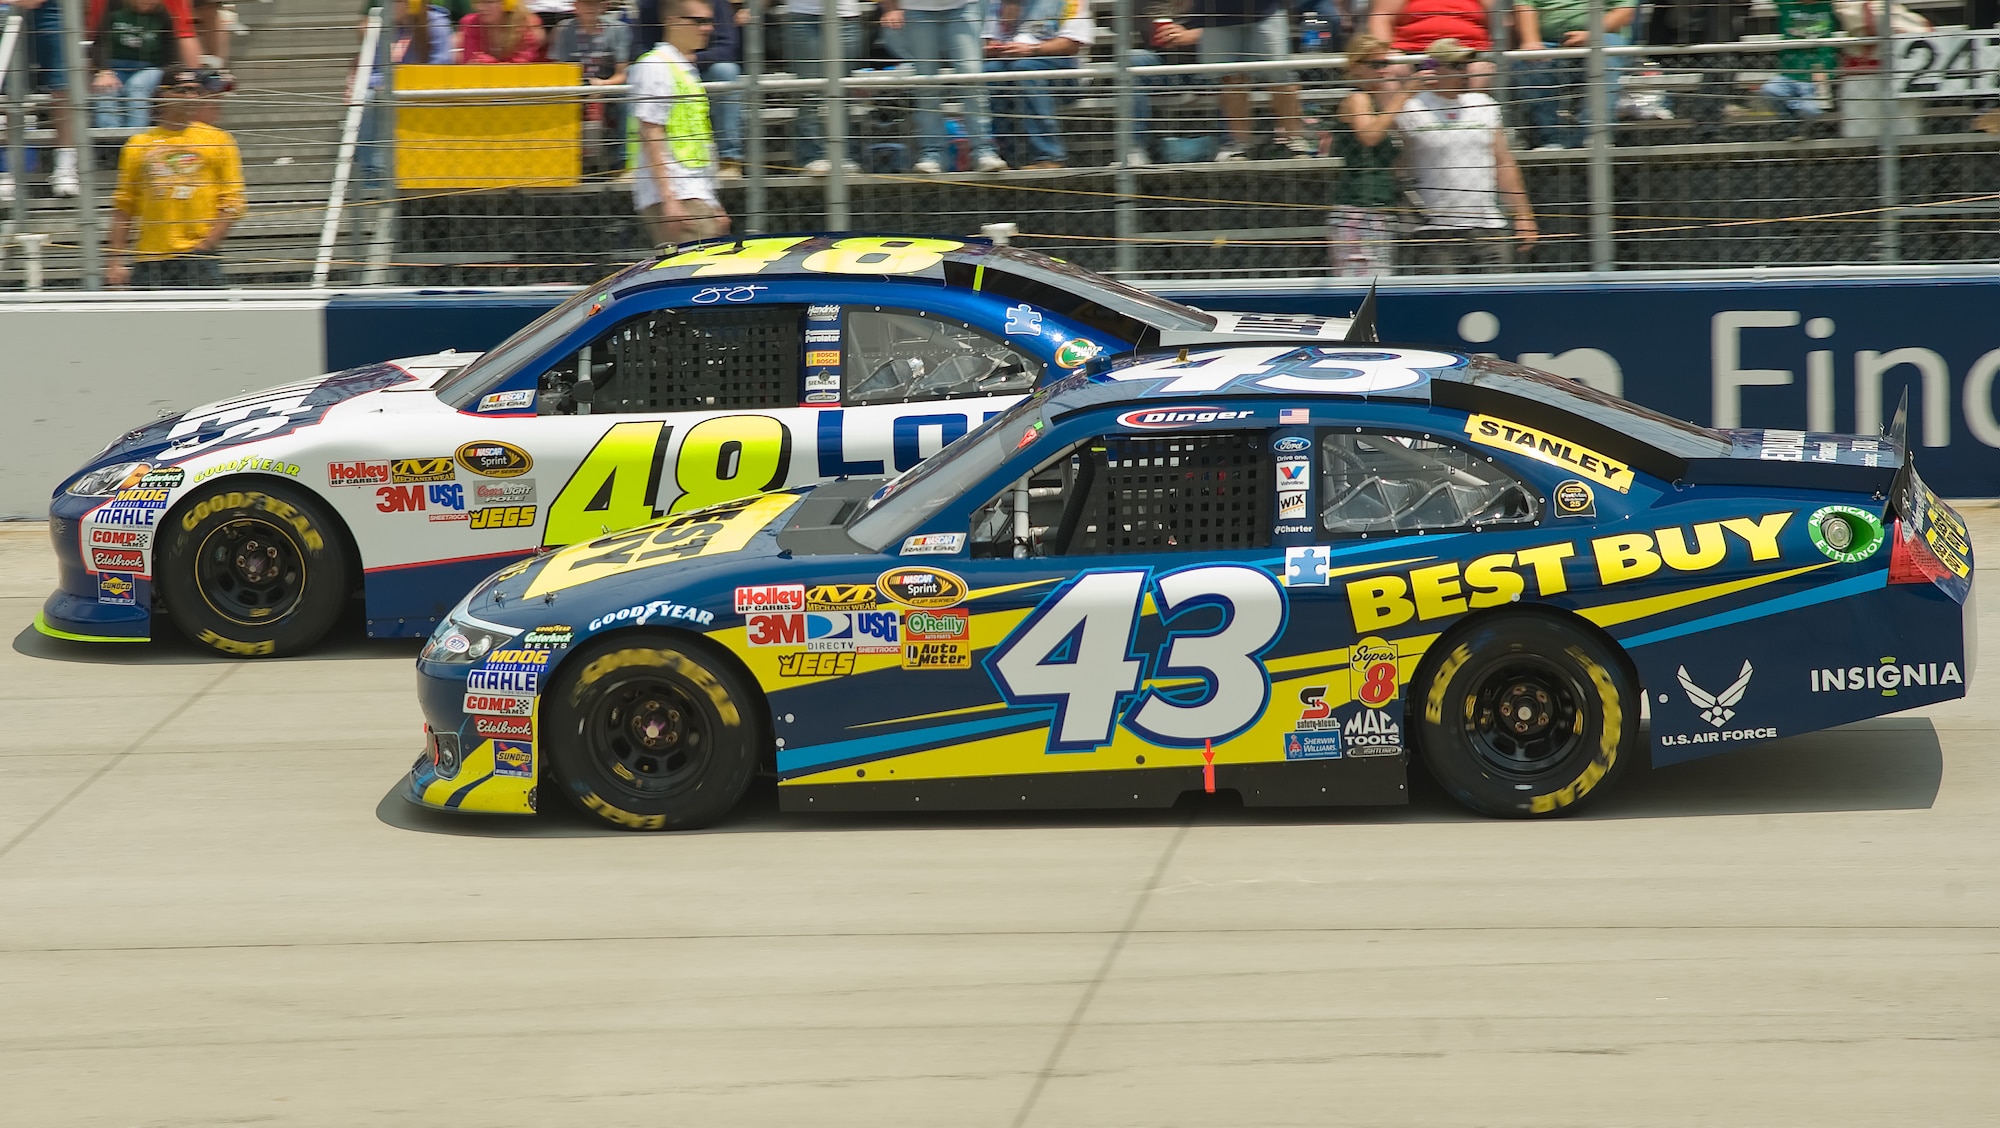 The No. 48 car and driver Jimmie Johnson (left) were slightly ahead of the No. 43 car, co-sponsored by the U. S. Air Force, and driver A.J. Allmendinger, when the first caution flag came out May 15, 2011, at Dover International Speedway, Del. Mr. Allmendinger and his No. 43 car withdrew from the FedEx 400 benefiting Autism Speaks due to engine problems later in the race. (U.S. Air Force photo by Airman 1st Class Jacob Morgan)